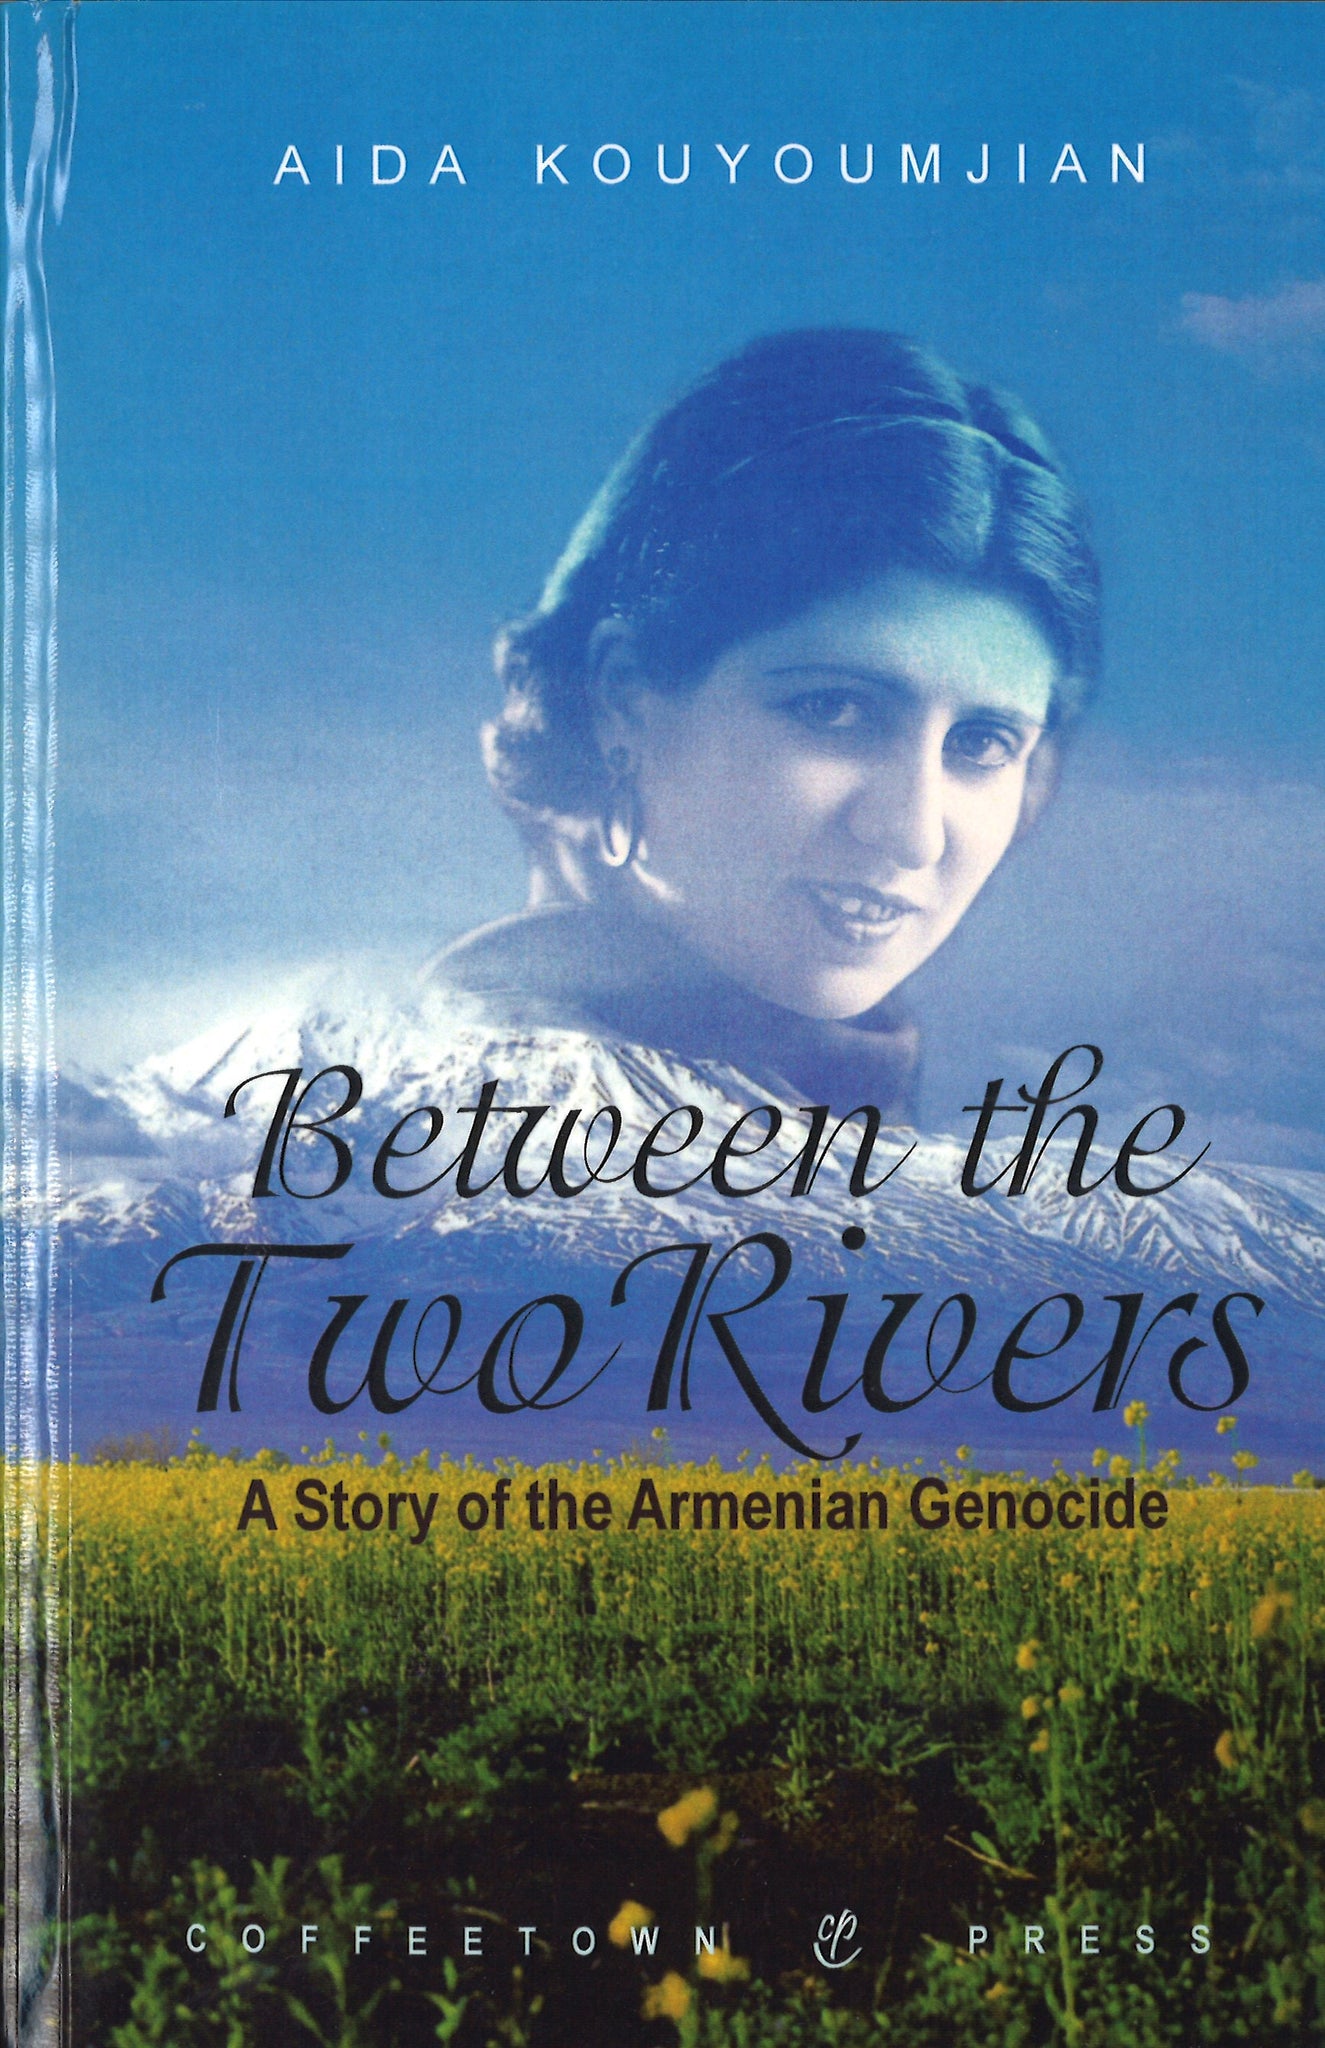 BETWEEN THE TWO RIVERS: A Story of the Armenian Genocide